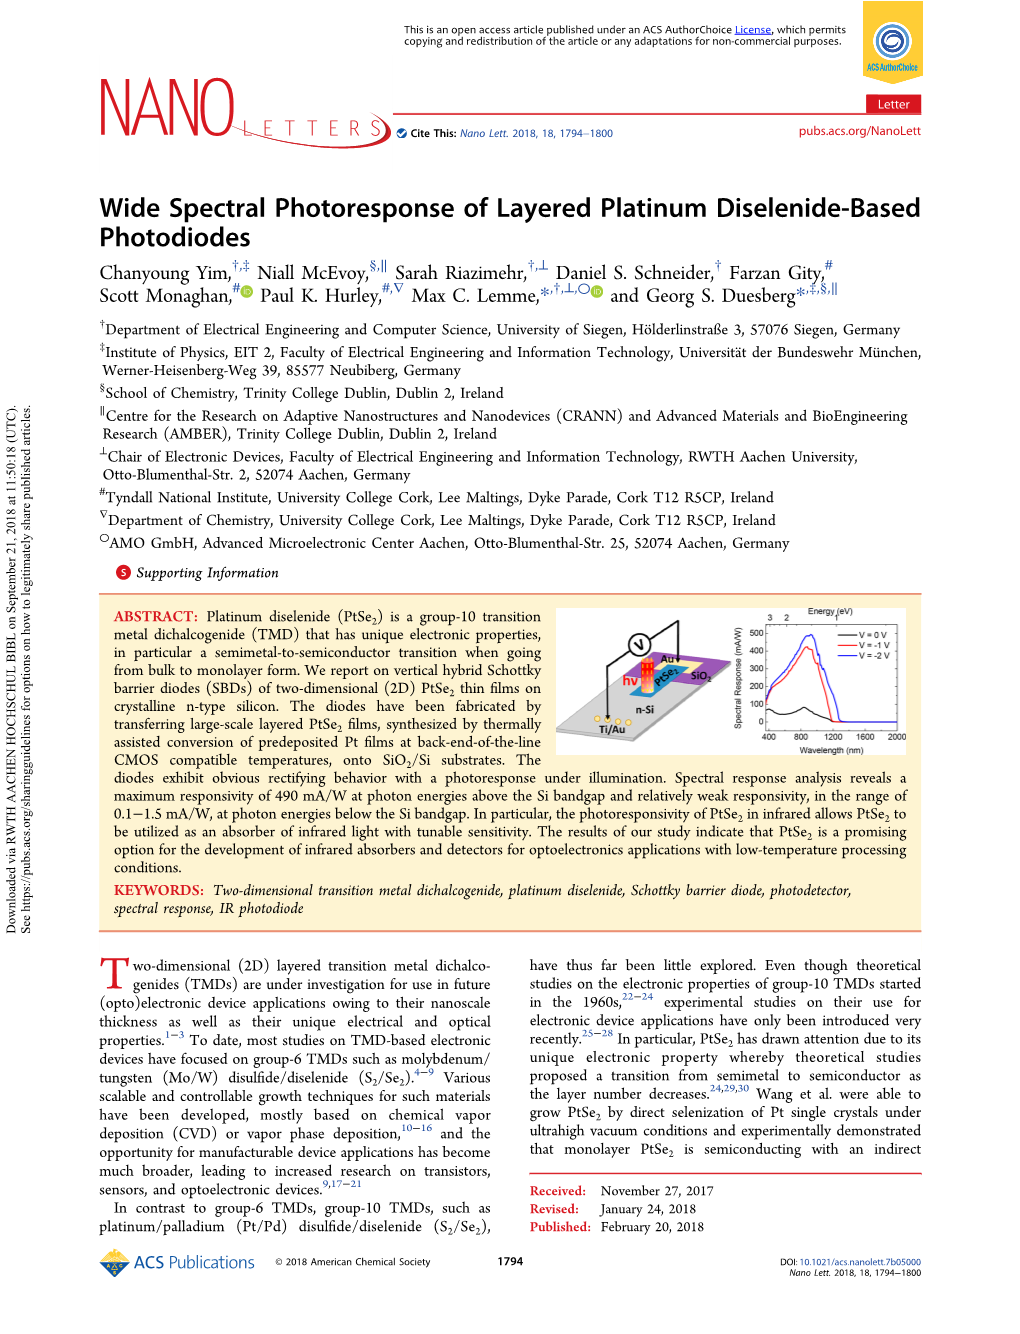 Wide Spectral Photoresponse of Layered Platinum Diselenide-Based Photodiodes † ‡ § ∥ † ⊥ † # Chanyoung Yim, , Niall Mcevoy, , Sarah Riazimehr, , Daniel S